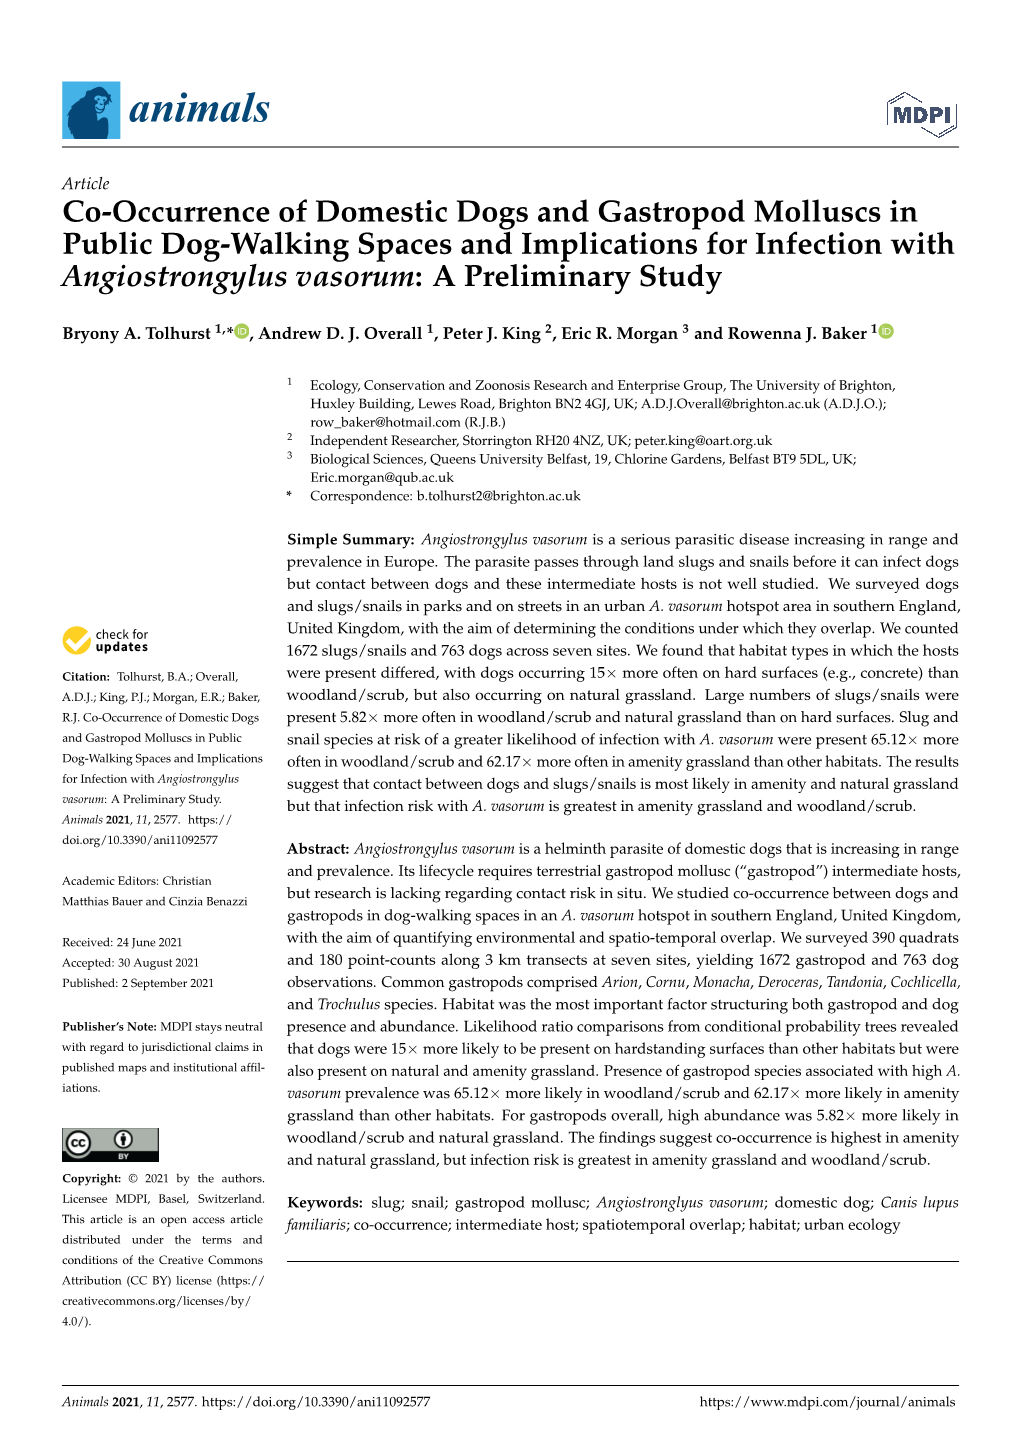 Co-Occurrence of Domestic Dogs and Gastropod Molluscs in Public Dog-Walking Spaces and Implications for Infection with Angiostrongylus Vasorum: a Preliminary Study